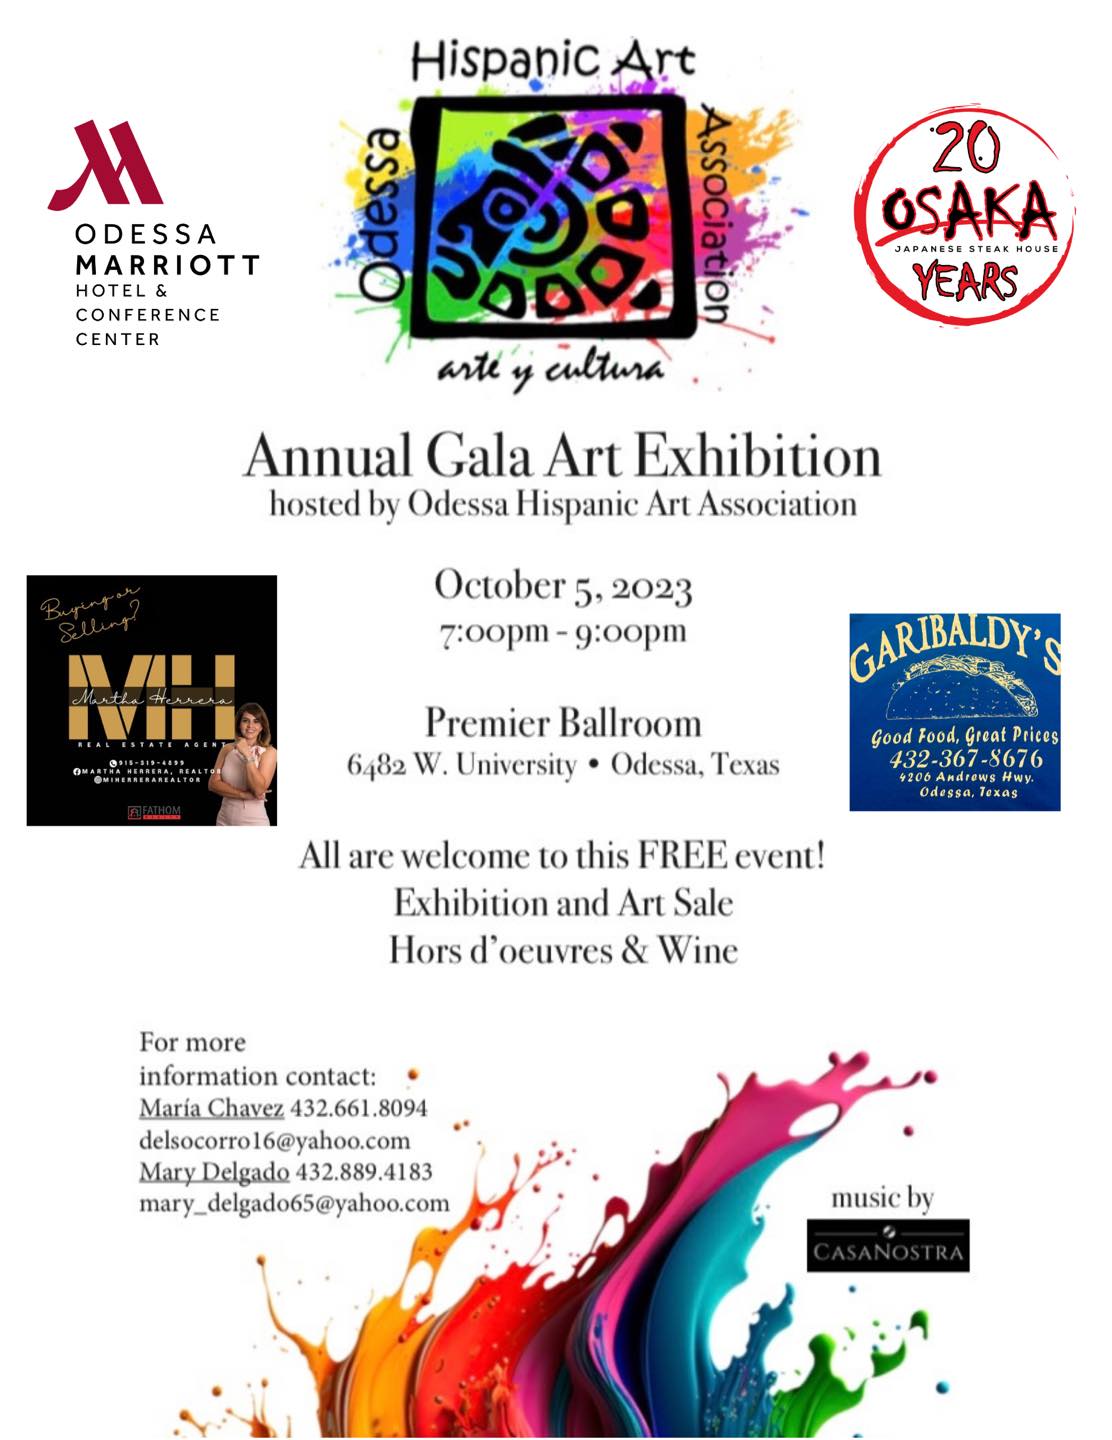 Annual Gala Art Exhibition hosted by the Odessa Hispanic Art Association